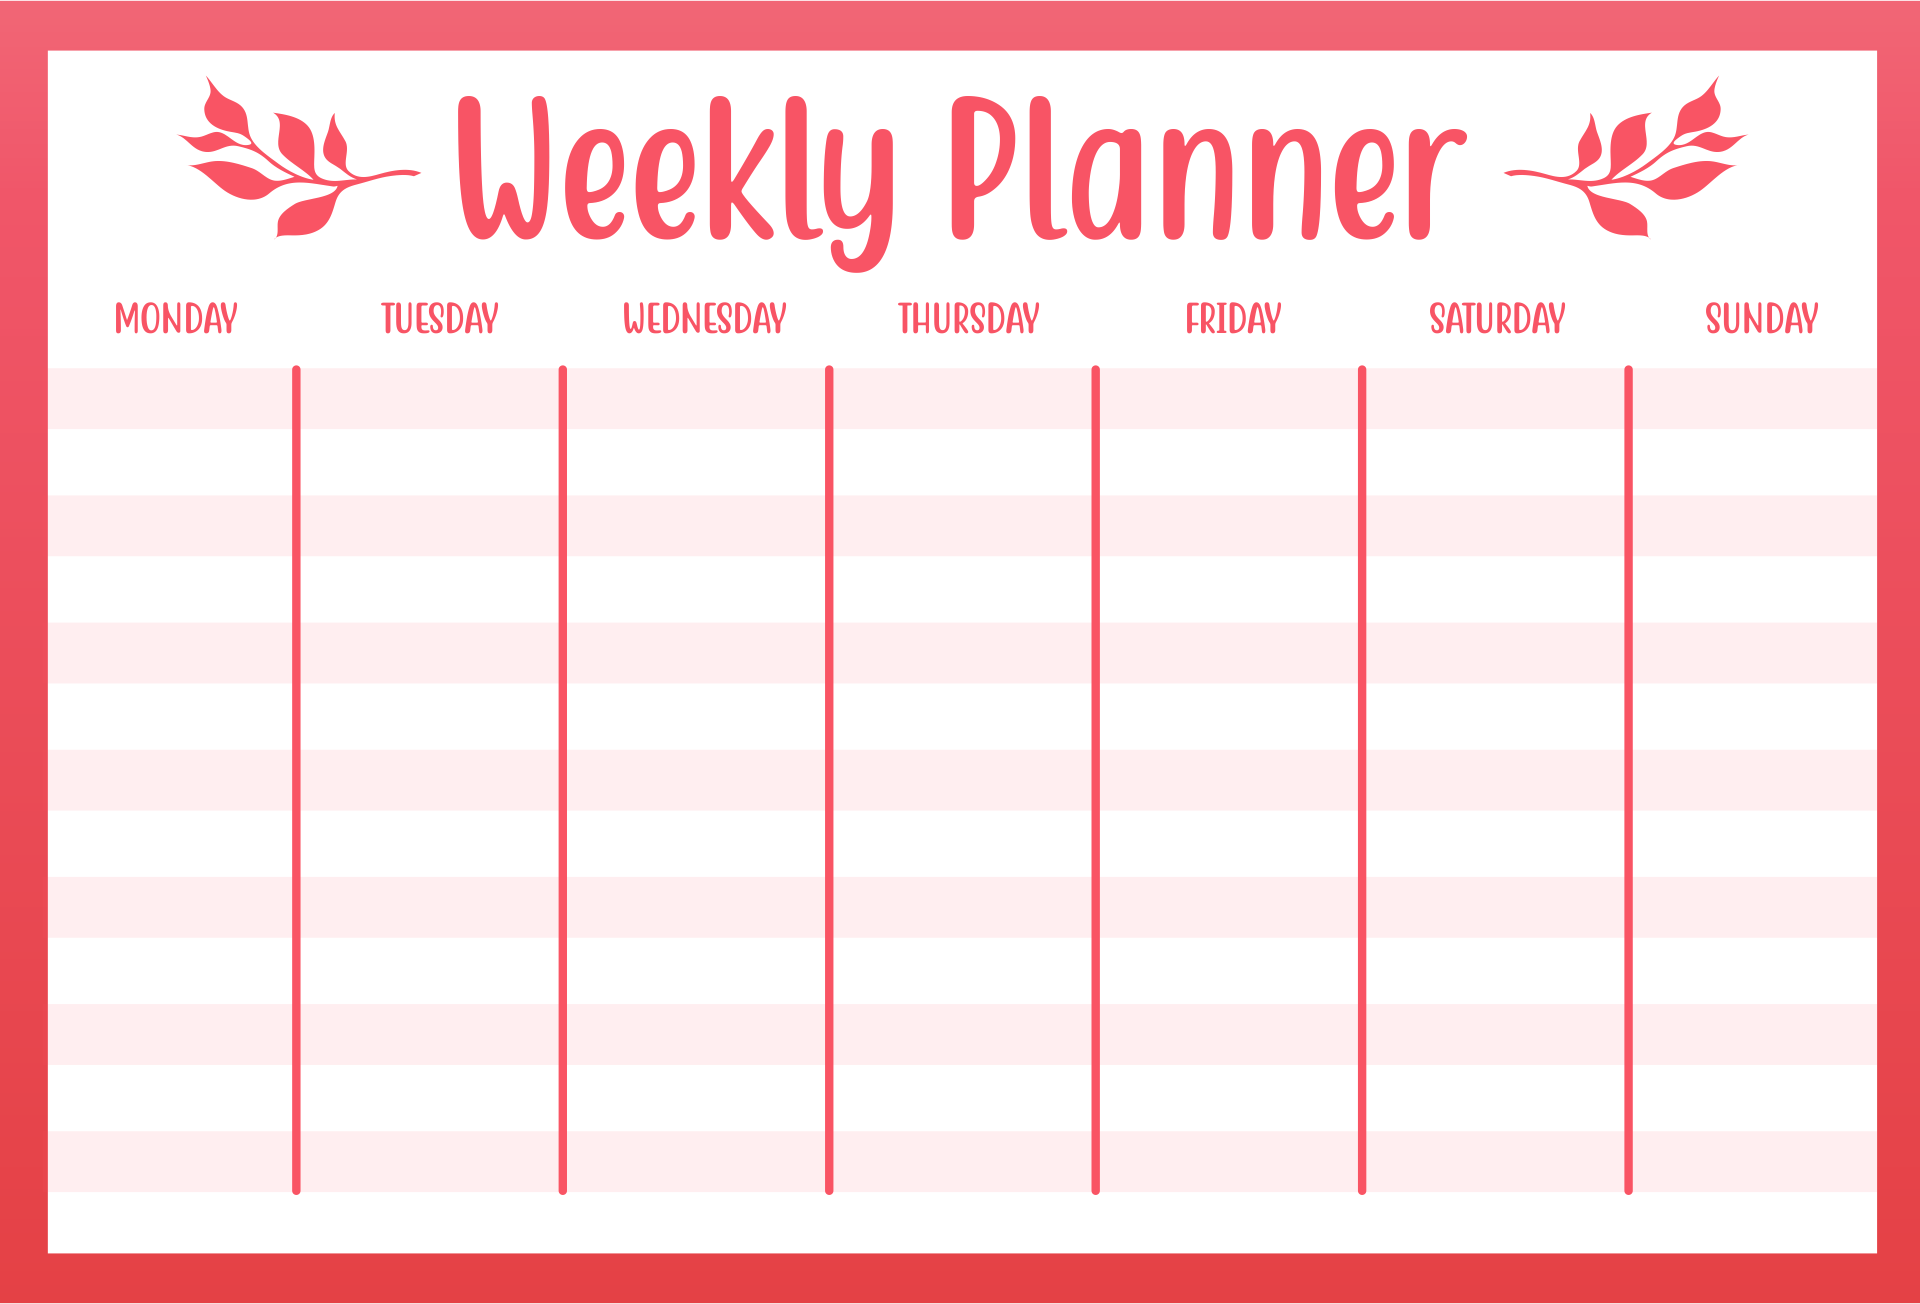 8-best-images-of-free-printable-time-management-calendar-printable-weekly-planner-with-times